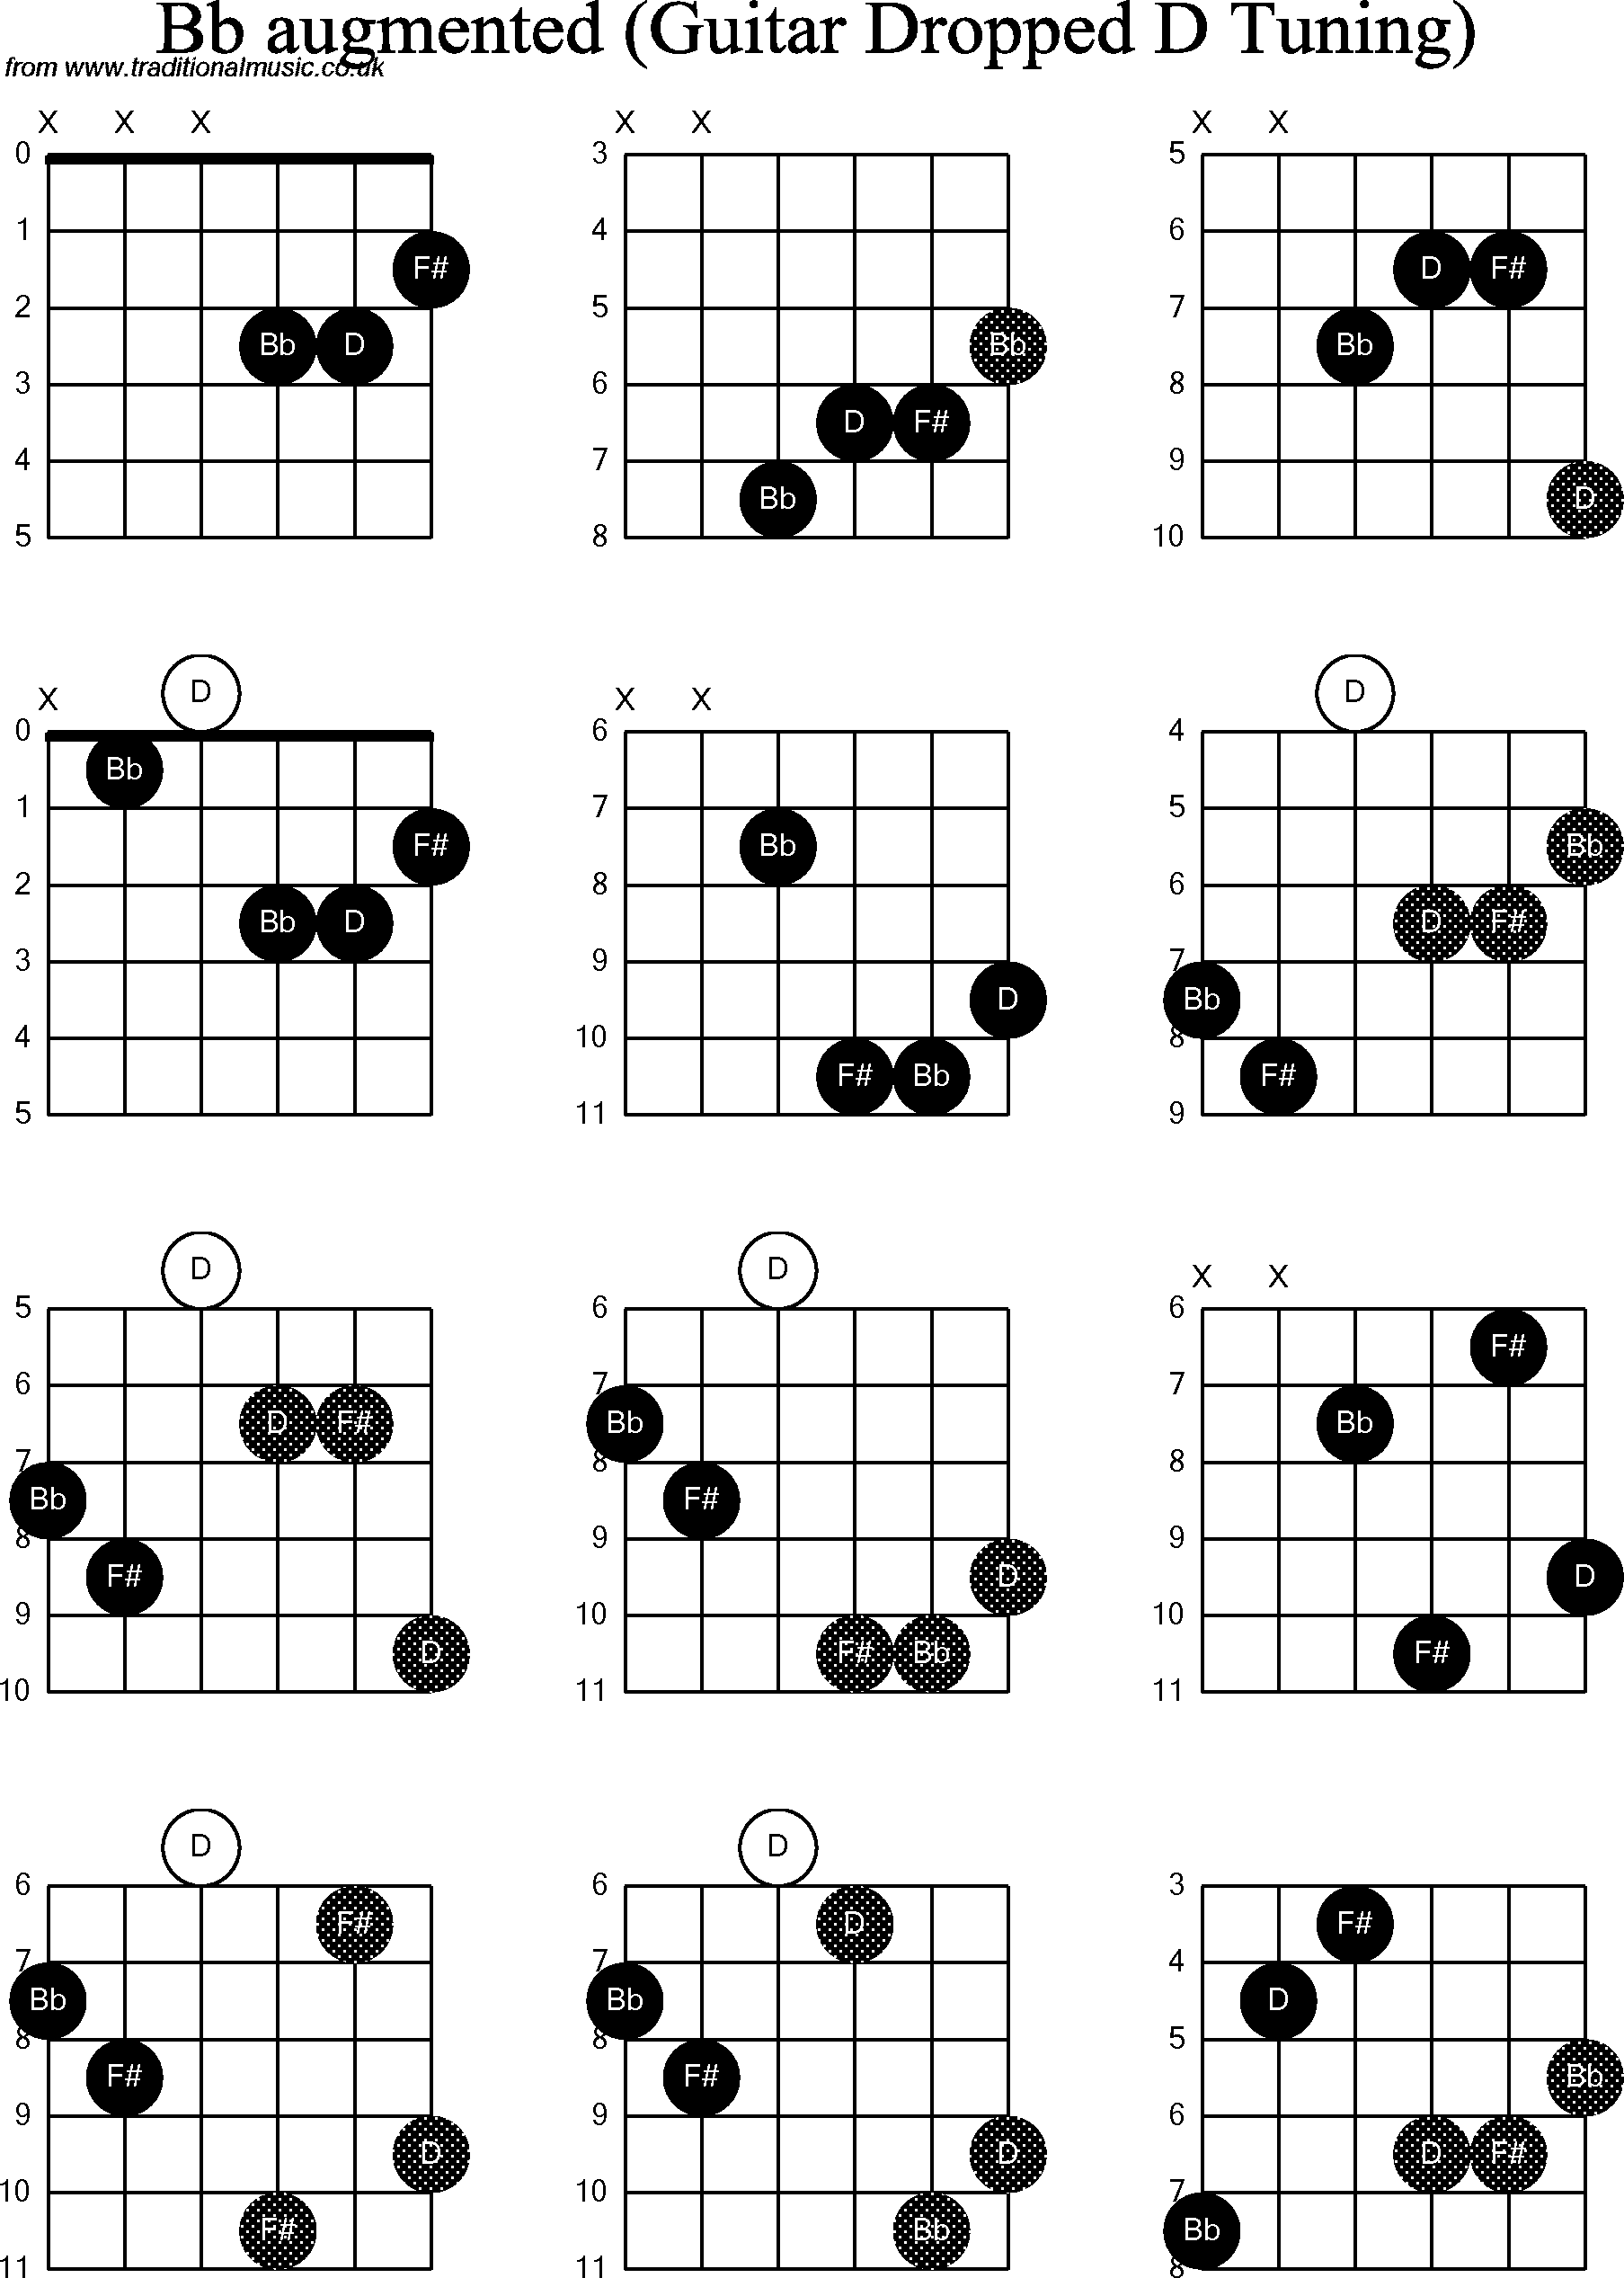 Chord diagrams for dropped D Guitar(DADGBE), Bb Augmented